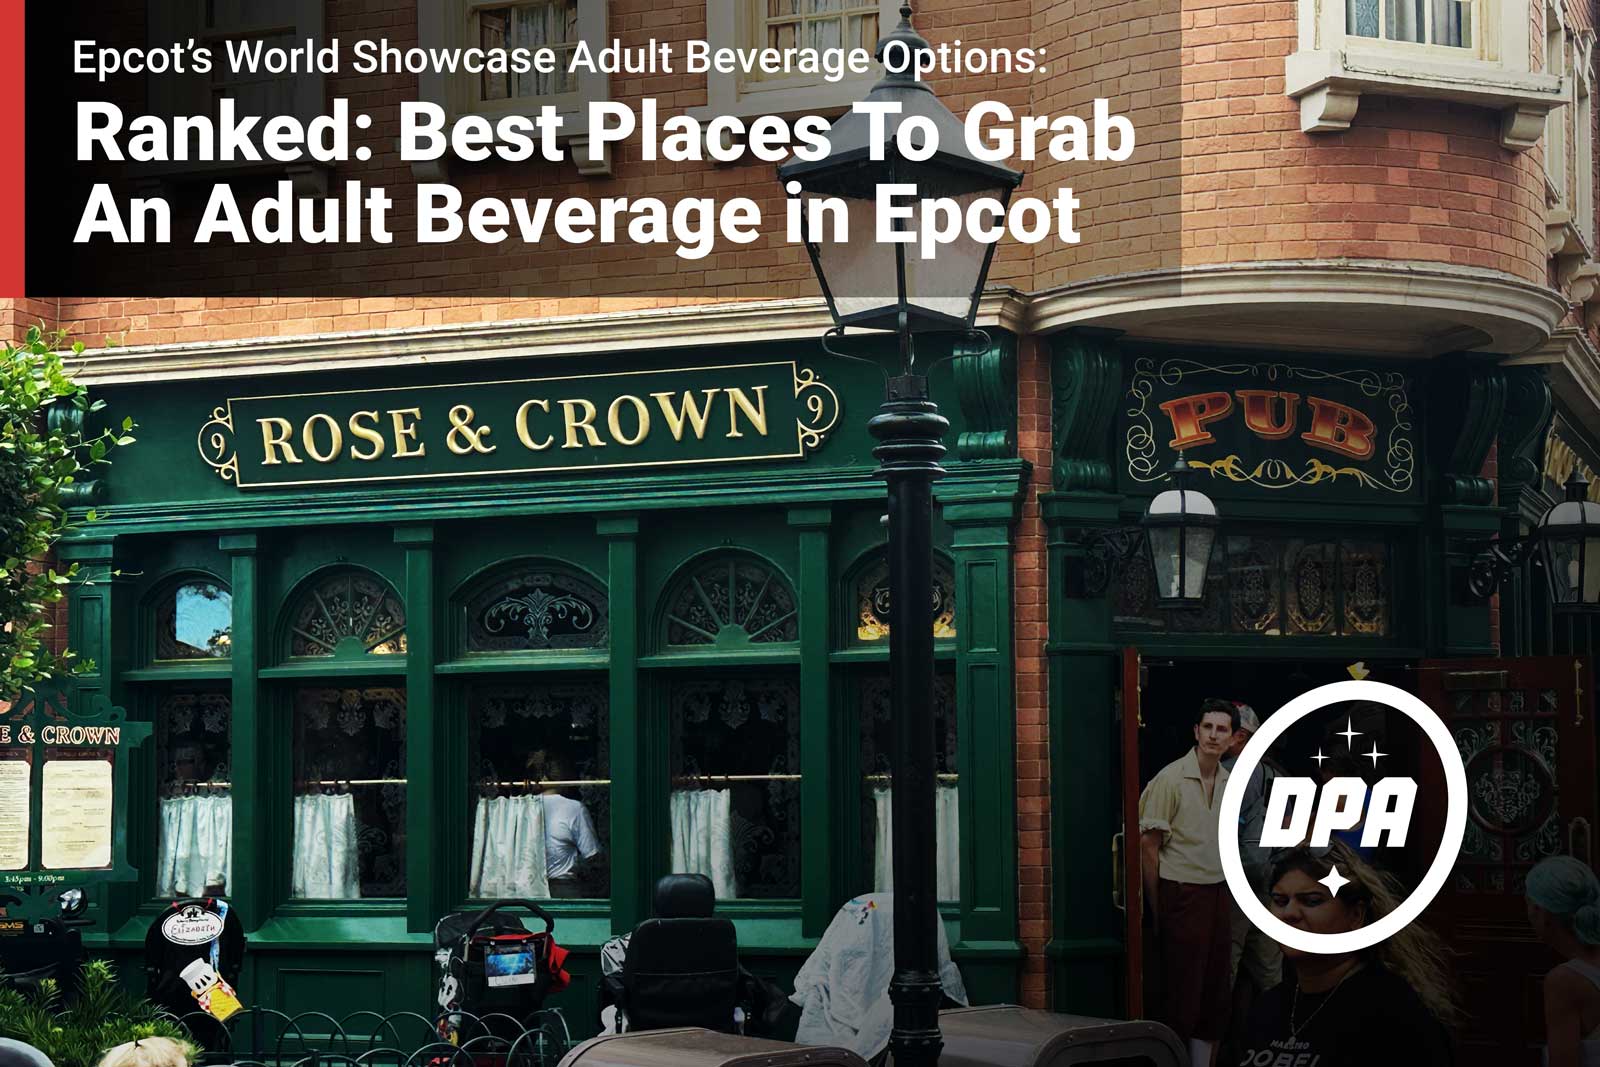 Ranked: Best Places To Grab An Adult Beverage in Epcot's World Showcase